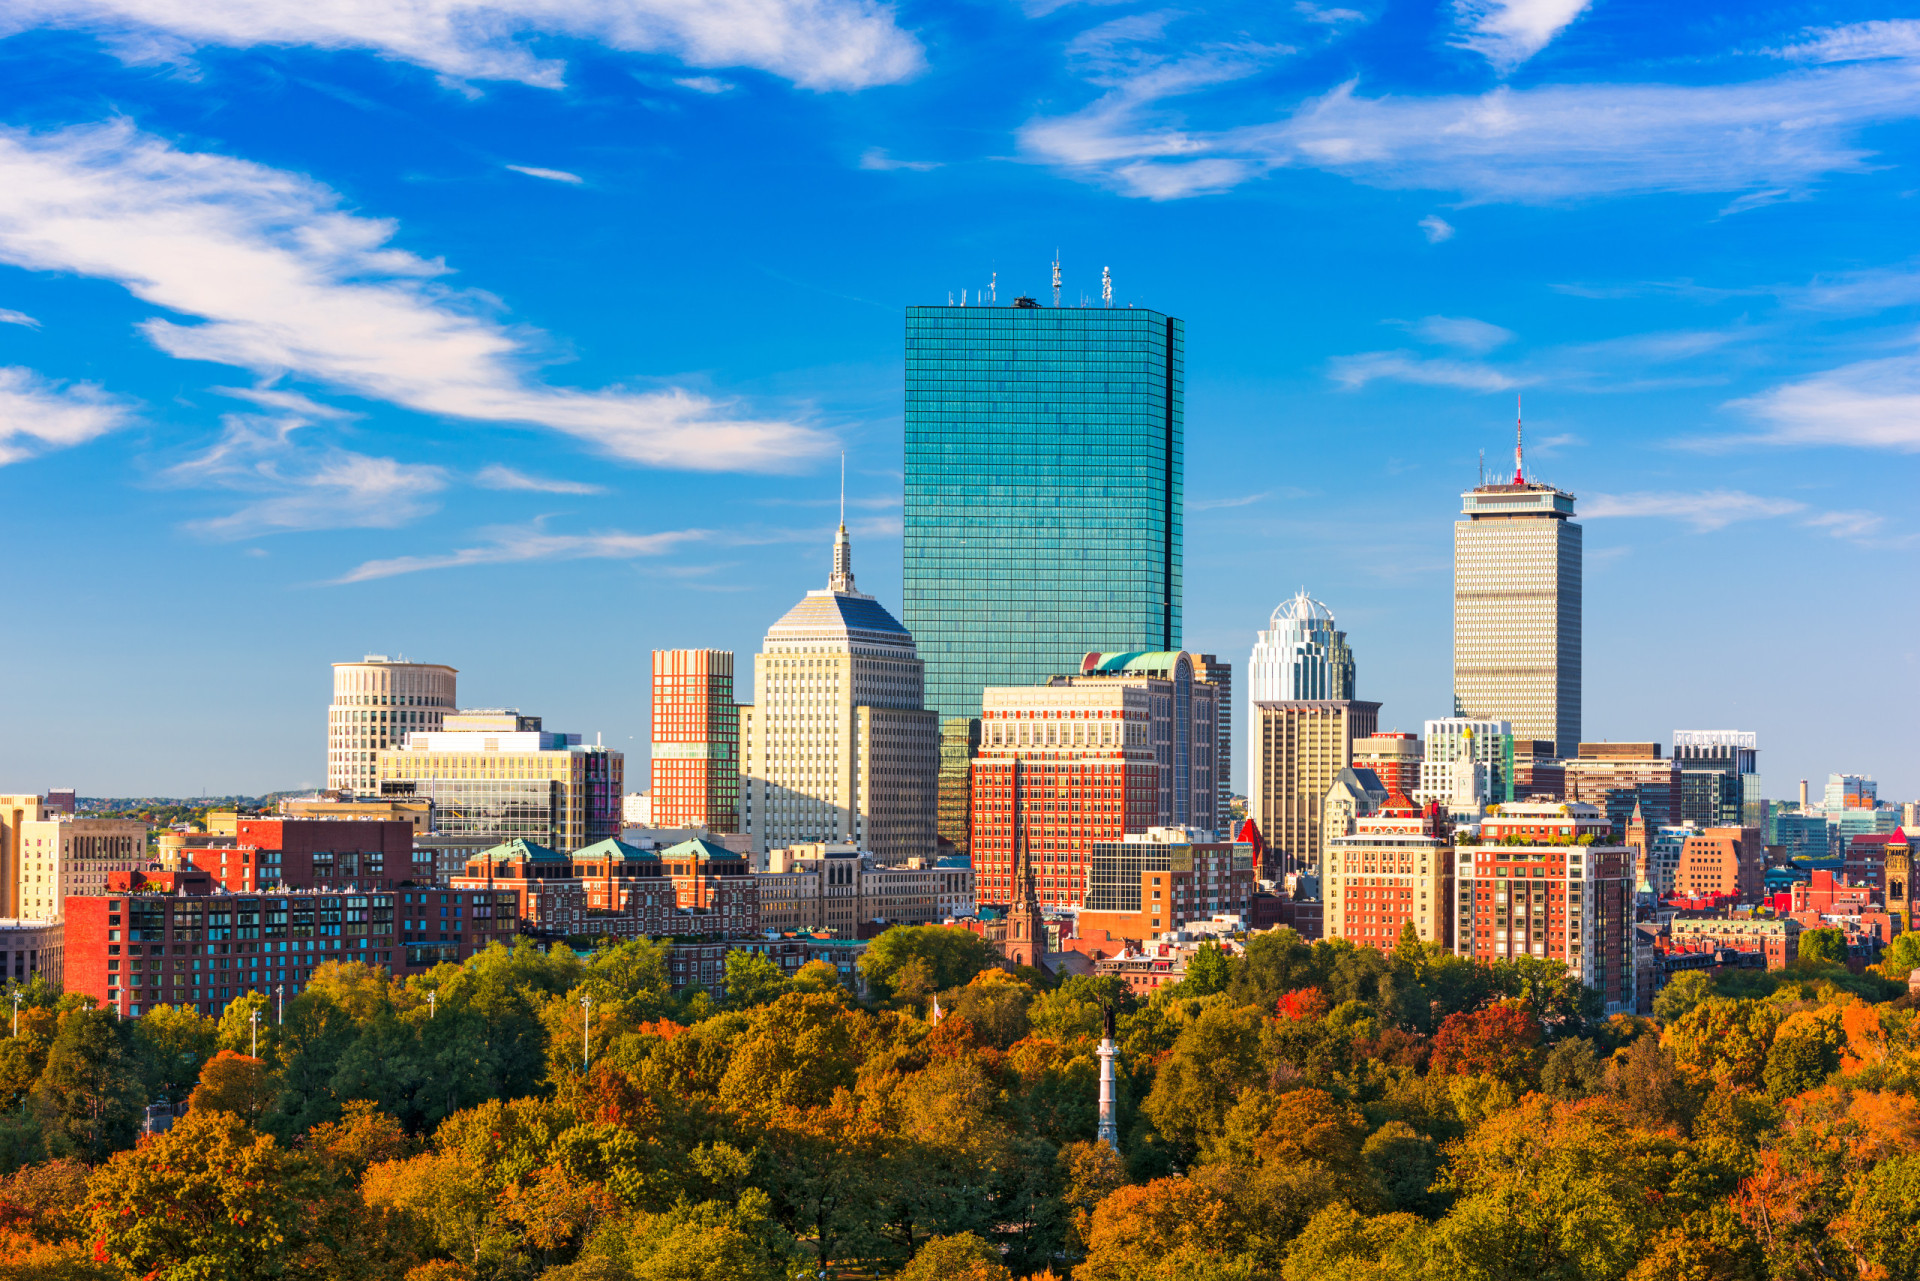 <p>Boston's rent index of 75.2 mirrors its role as a significant educational and technological hub. This city blends a rich history with modern innovation, contributing to its high living costs.</p><p>You may also like:<a href="https://www.starsinsider.com/n/308162?utm_source=msn.com&utm_medium=display&utm_campaign=referral_description&utm_content=651794en-in"> Least safe airlines in the world</a></p>